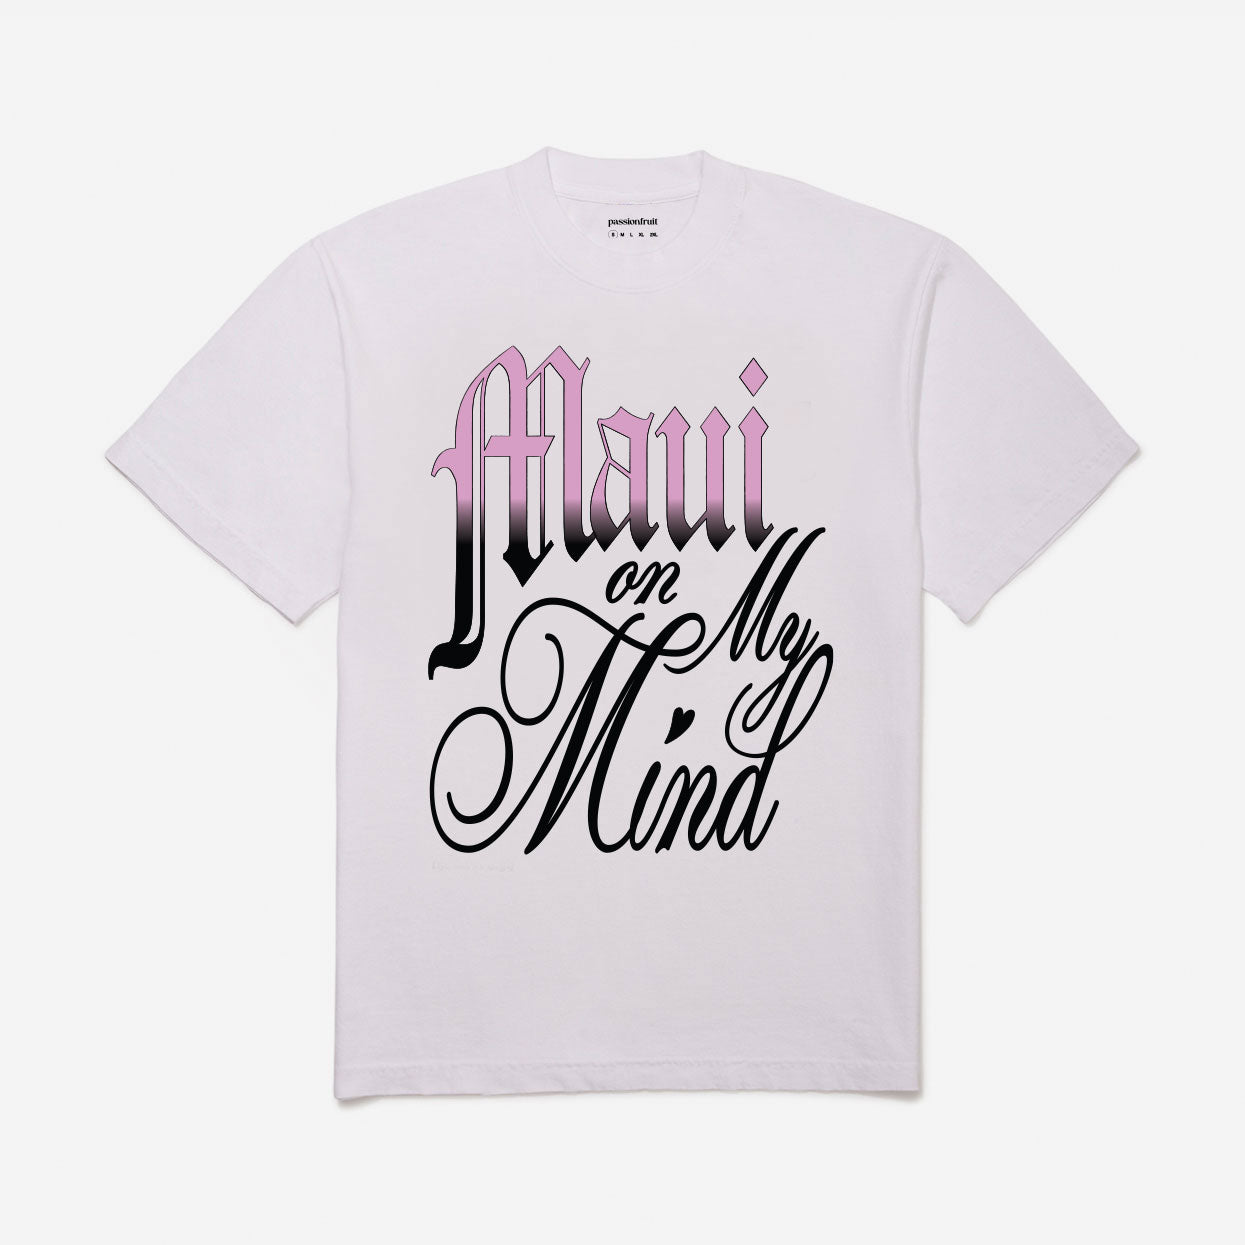 Maui On My Mind - Sold Out